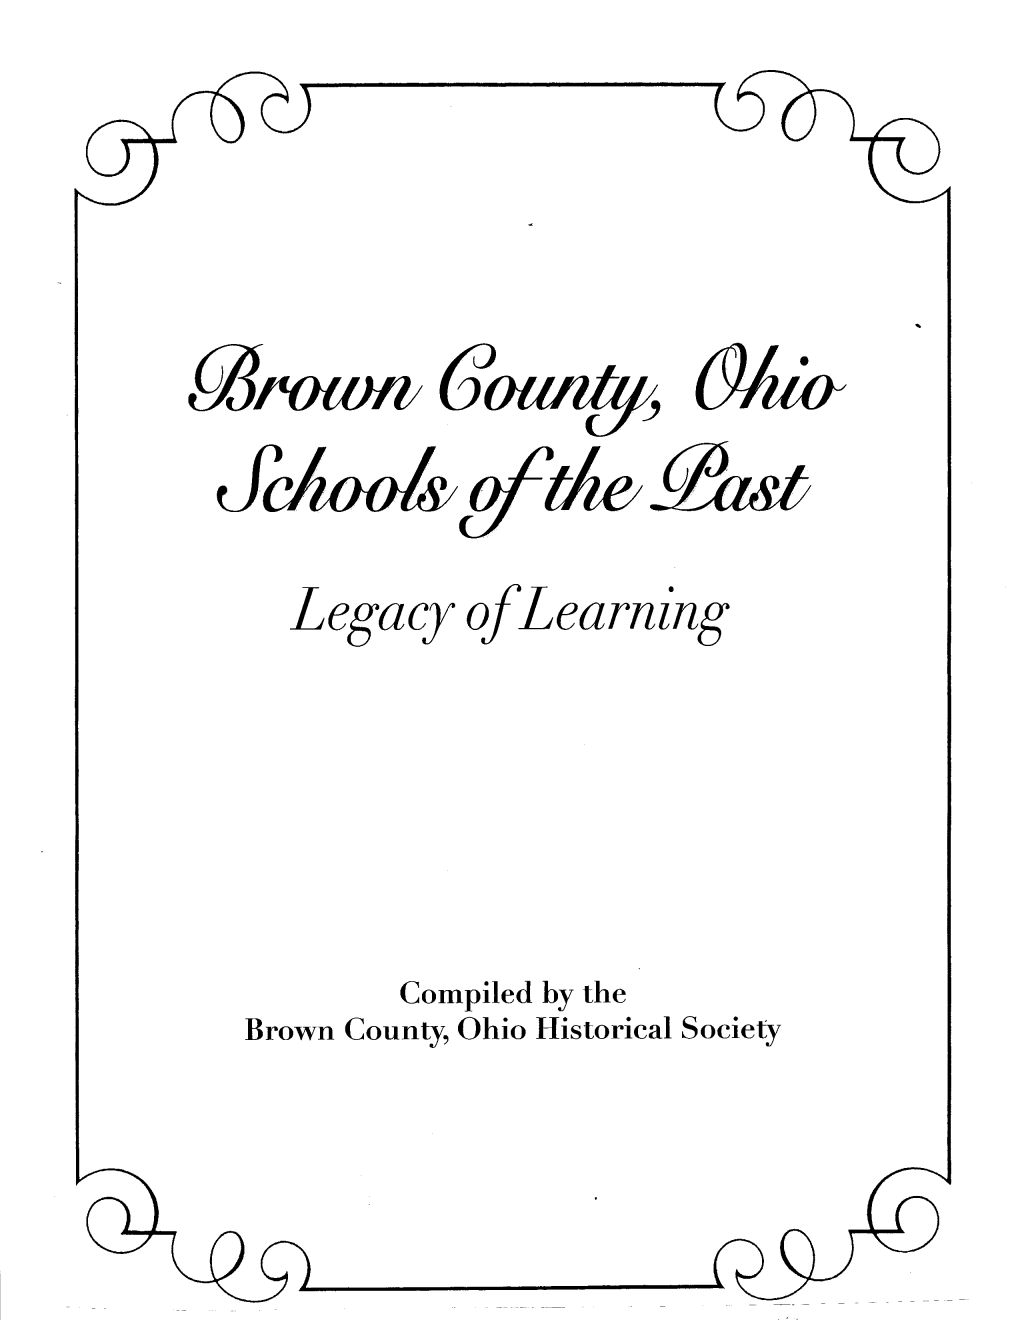 Ohio's Short Supply, Barter Was a Way of Life So Ing School Districts Was Outlined